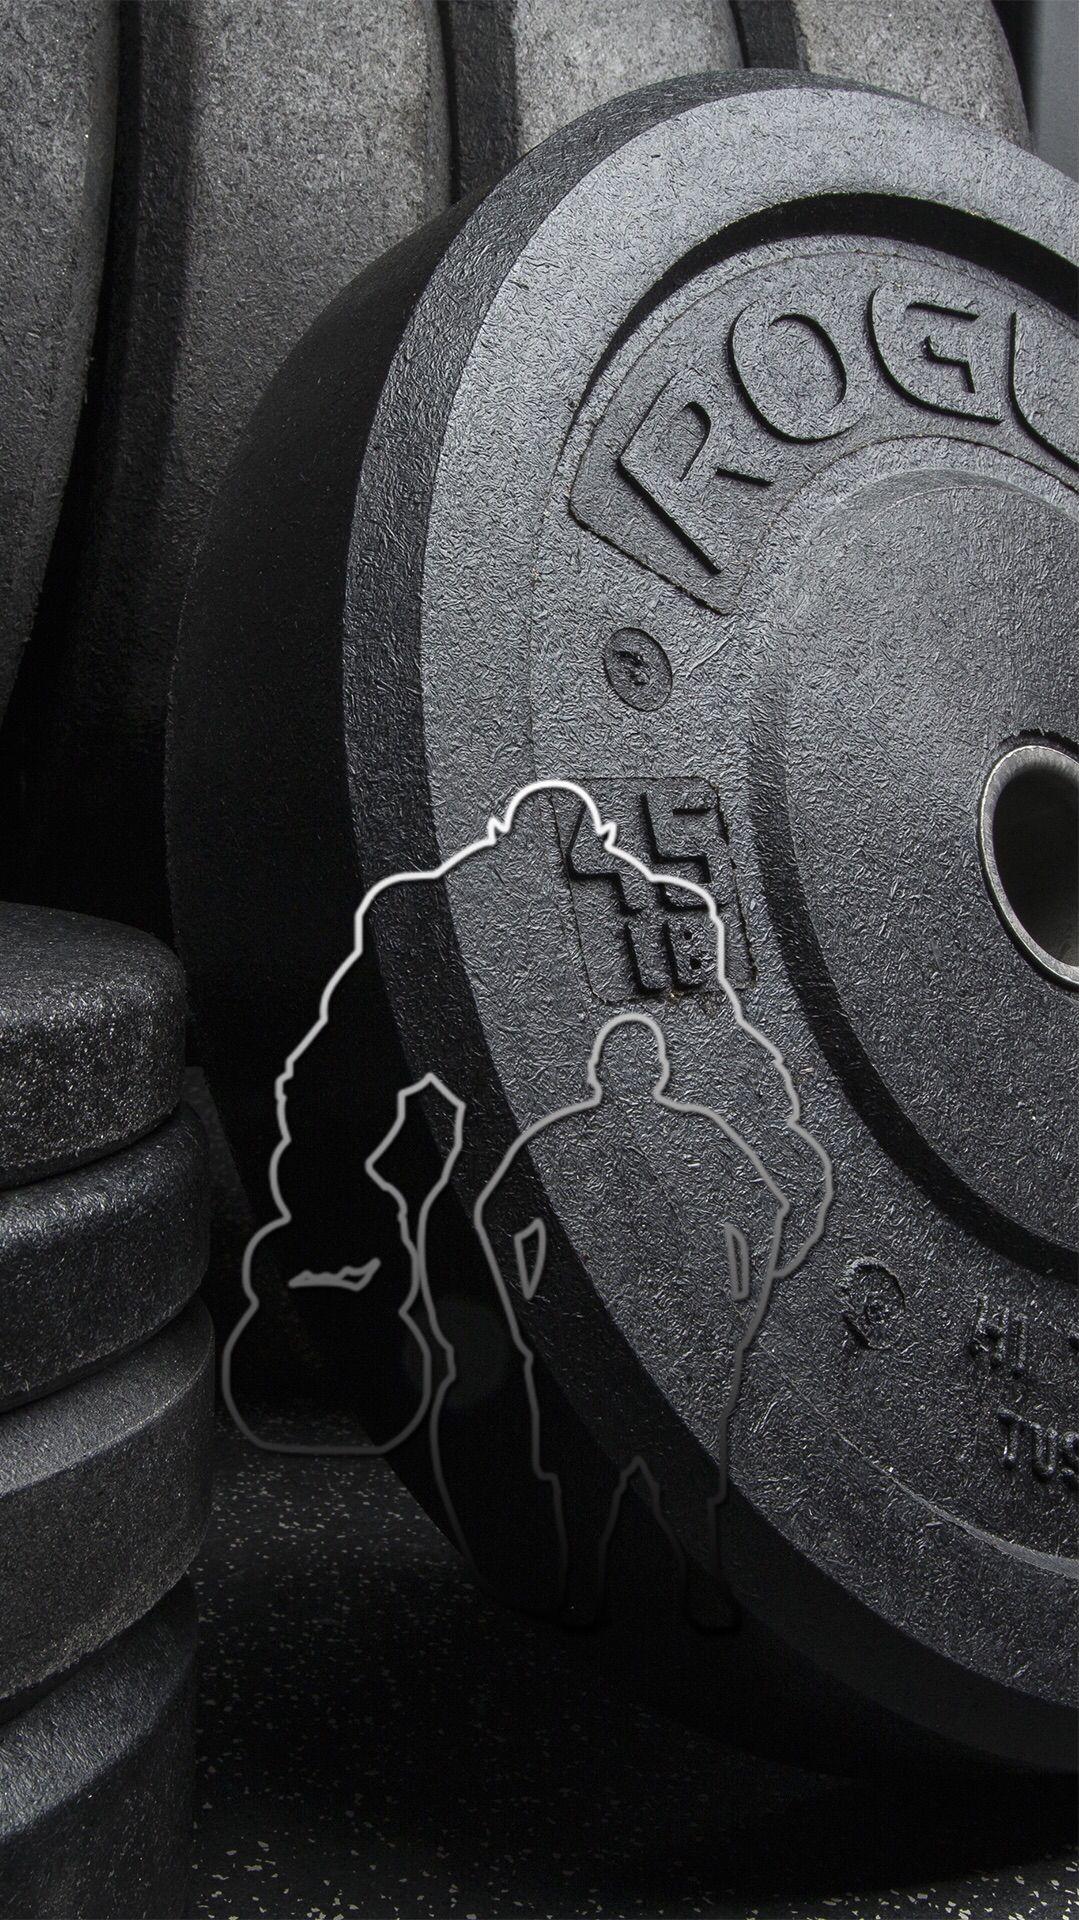 crossfit background iphone